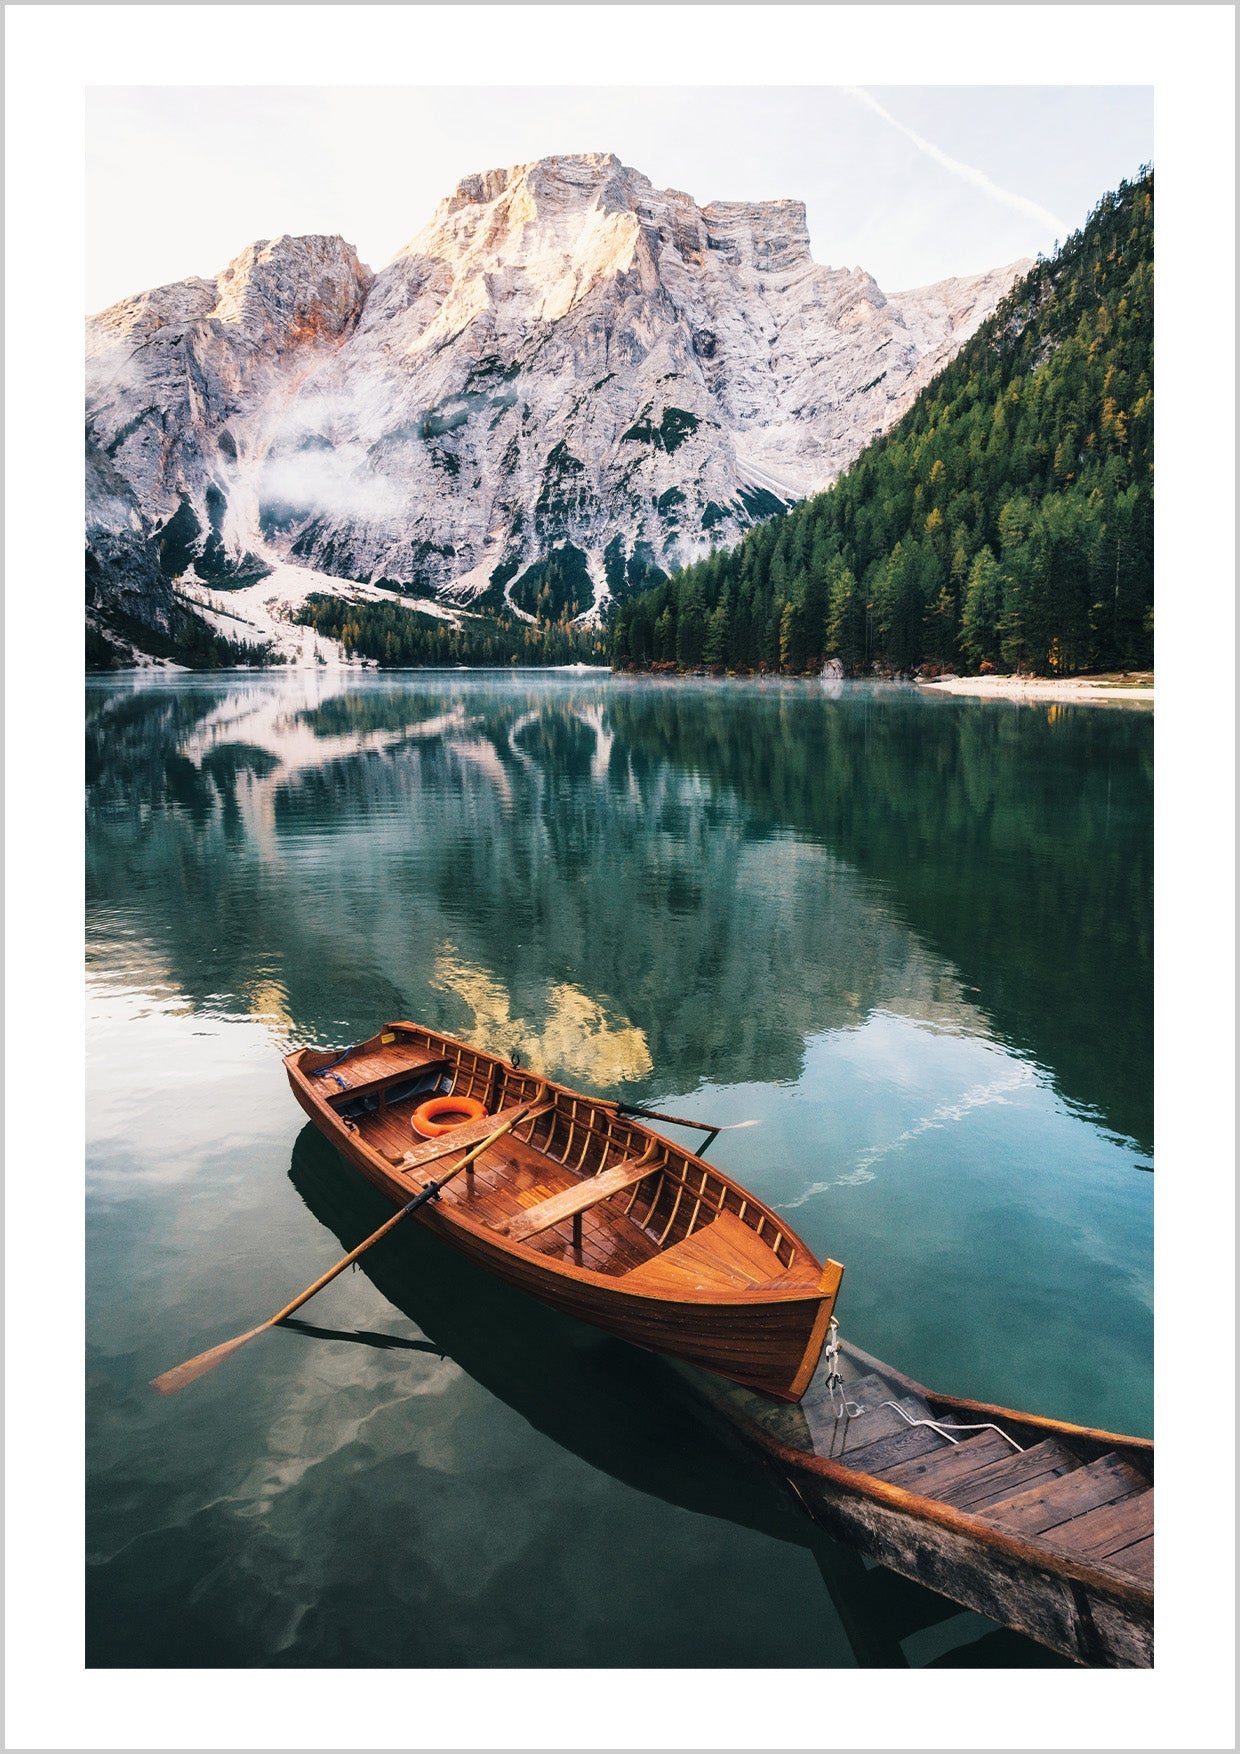 Nature poster with a photographic motif of a red canoe resting on a picturesque wooden pier on a quiet lake. On the side of the clear-blue lake, tall, ice-clad mountains are towering which is reflected beautifully on the still water surface.